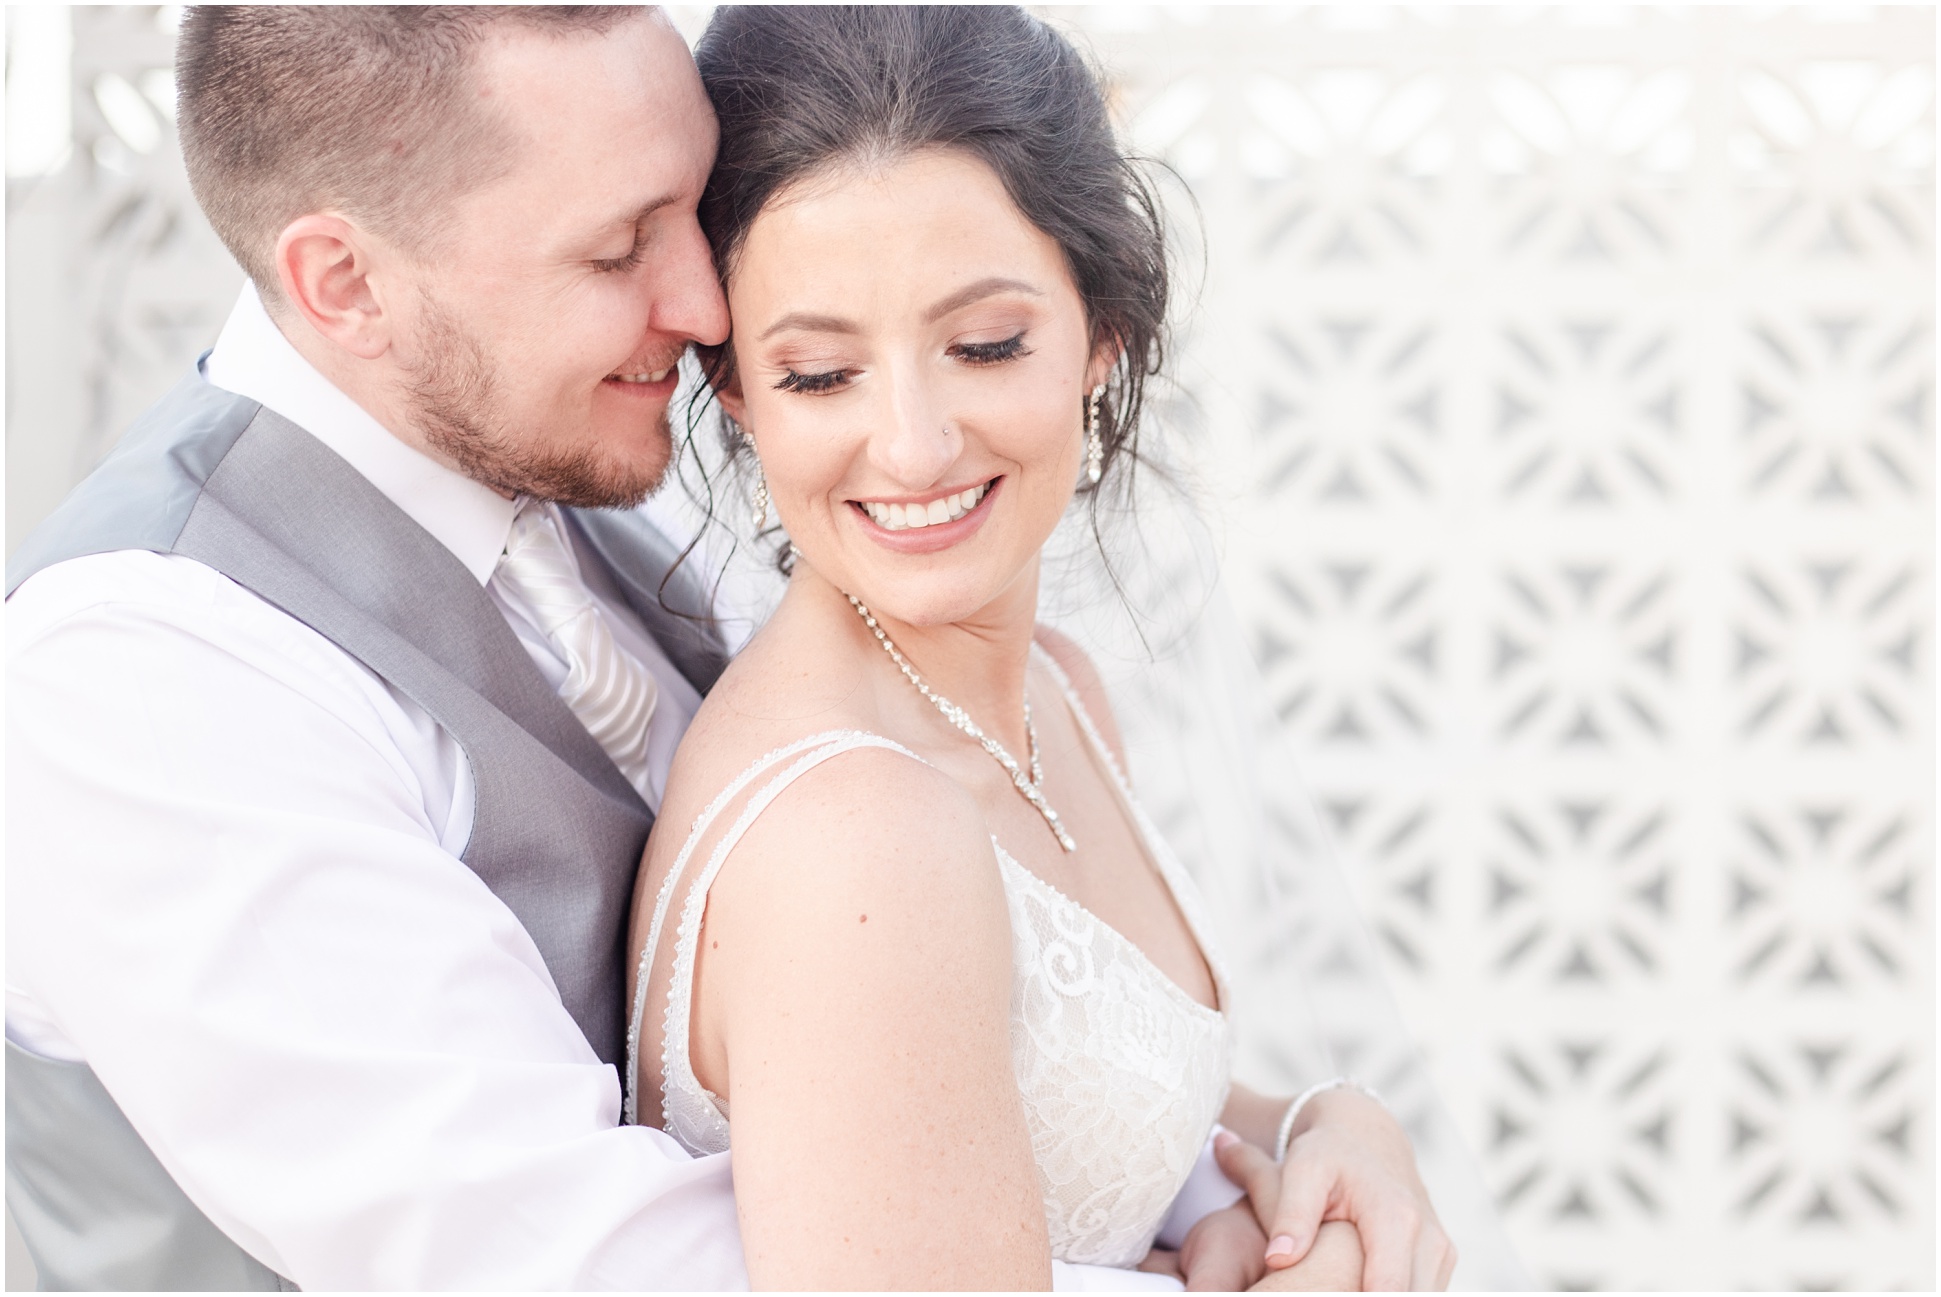 Groom snuggling into bride from behind while they both smile